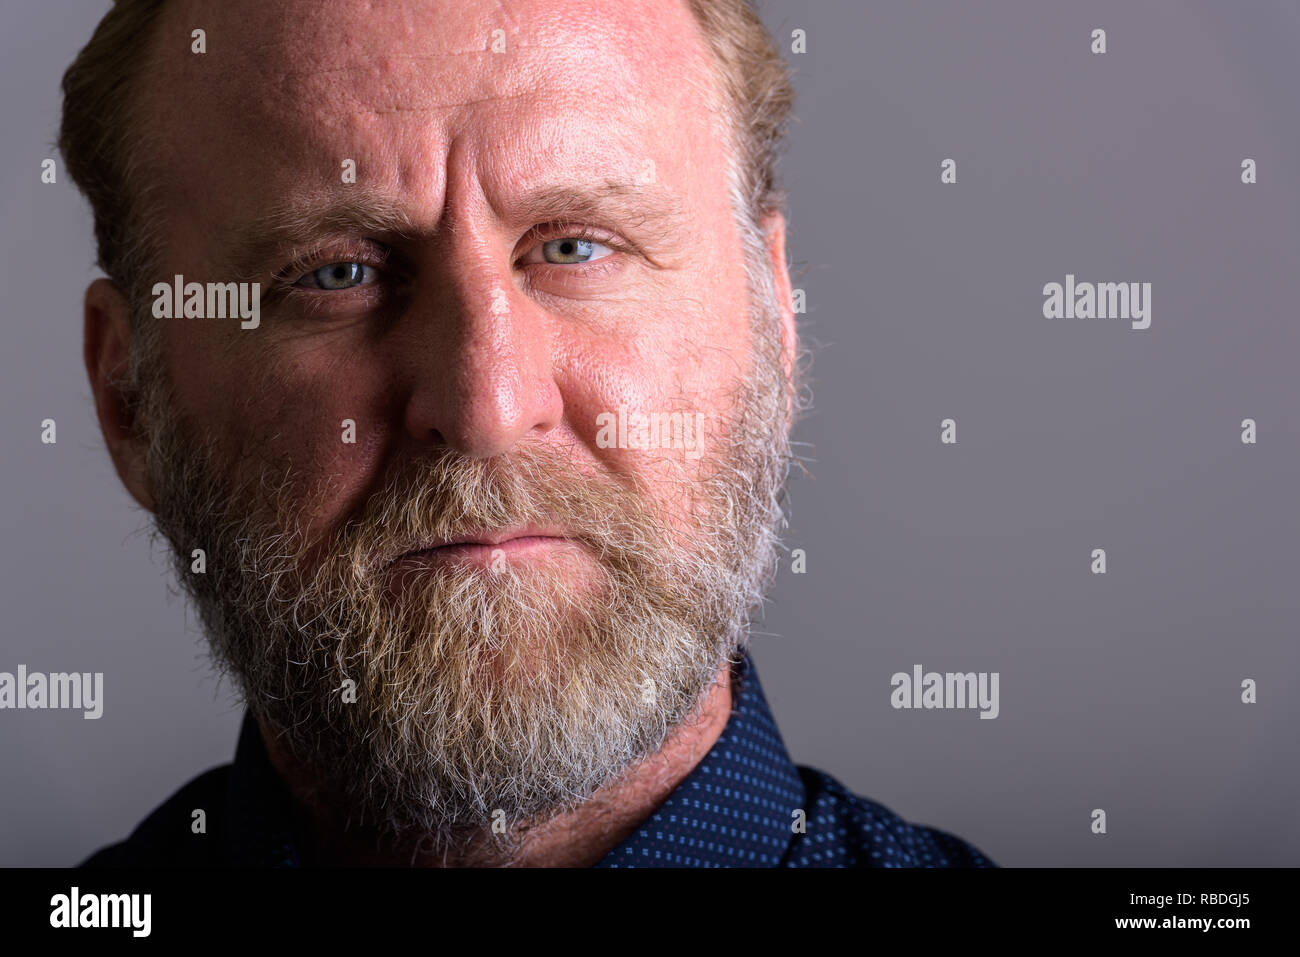 Close up portrait of mature bearded man looking at camera Banque D'Images